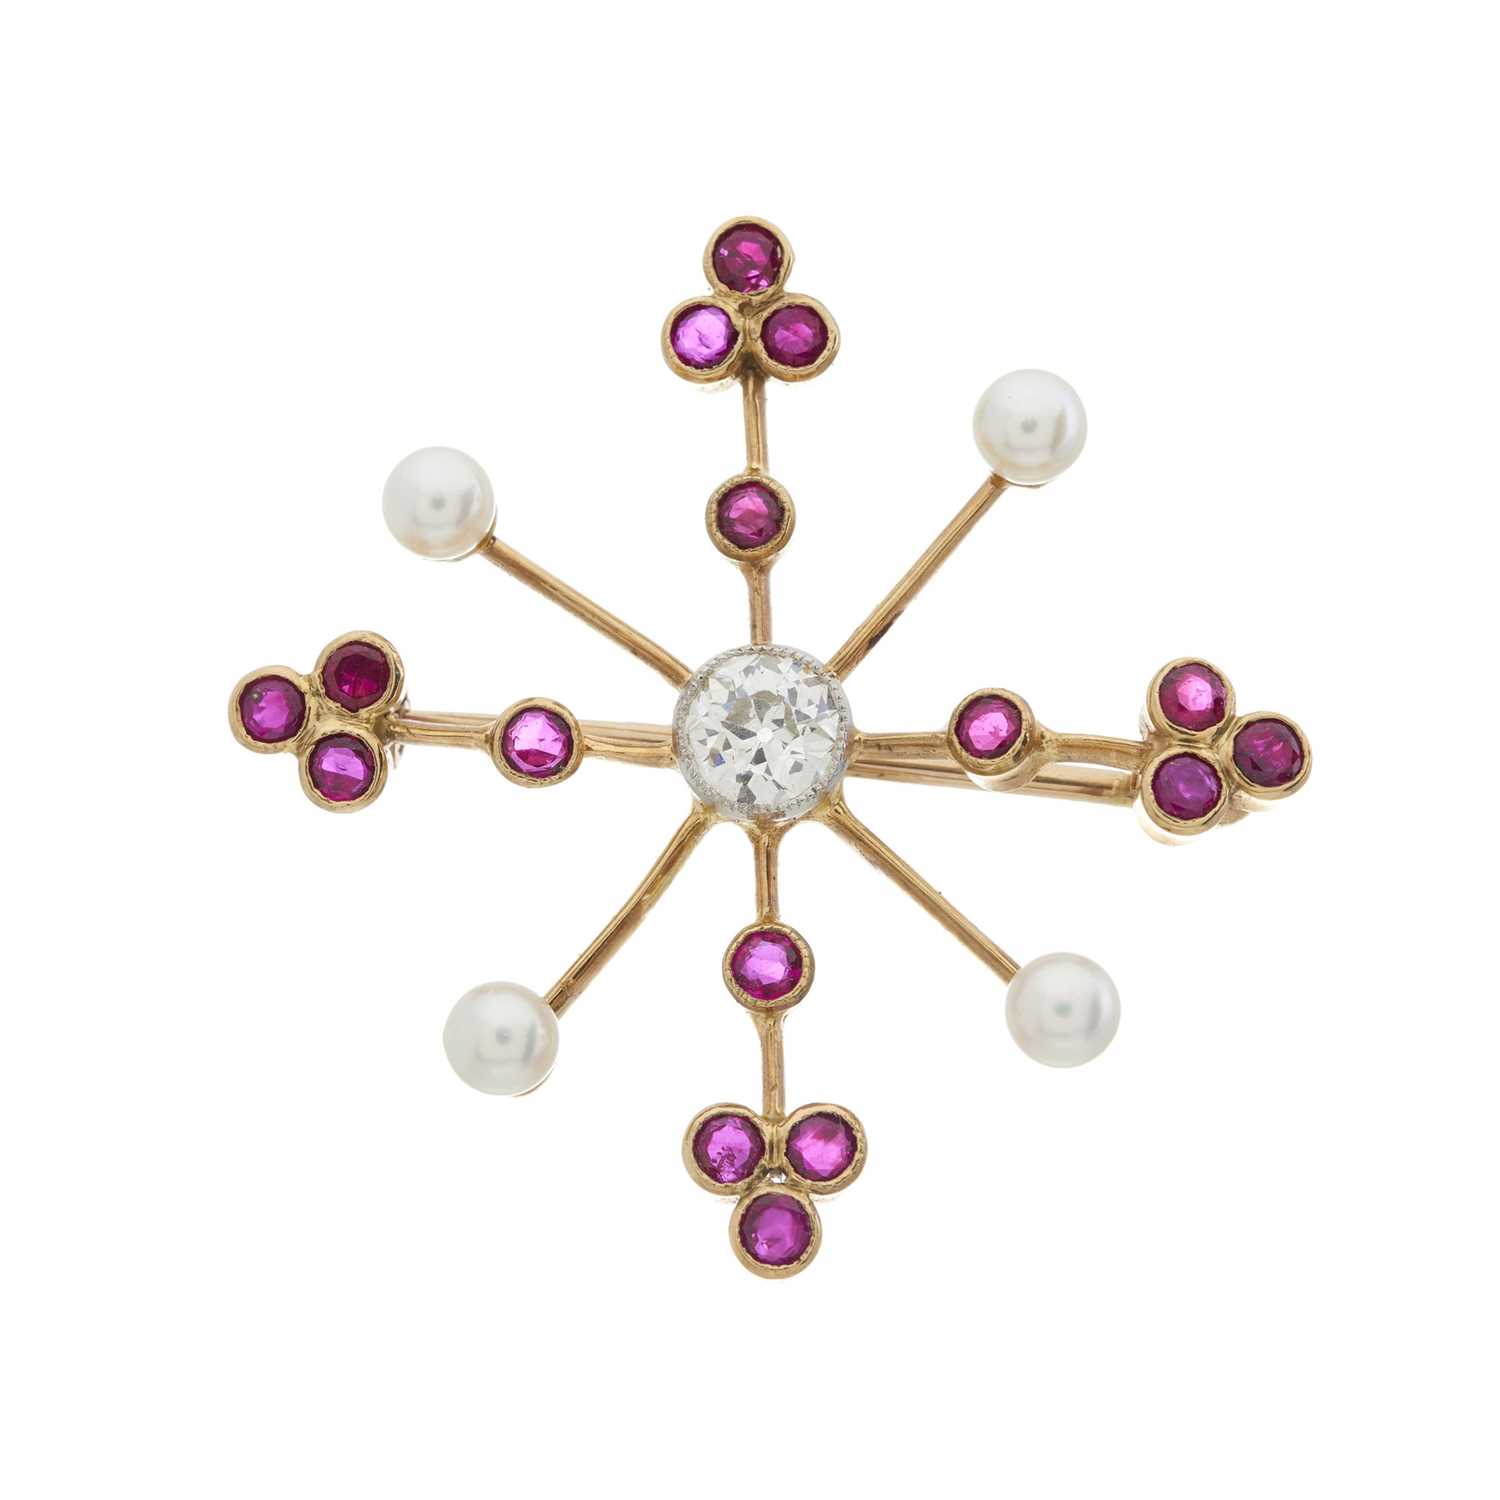 An Edwardian gold diamond, ruby and pearl brooch